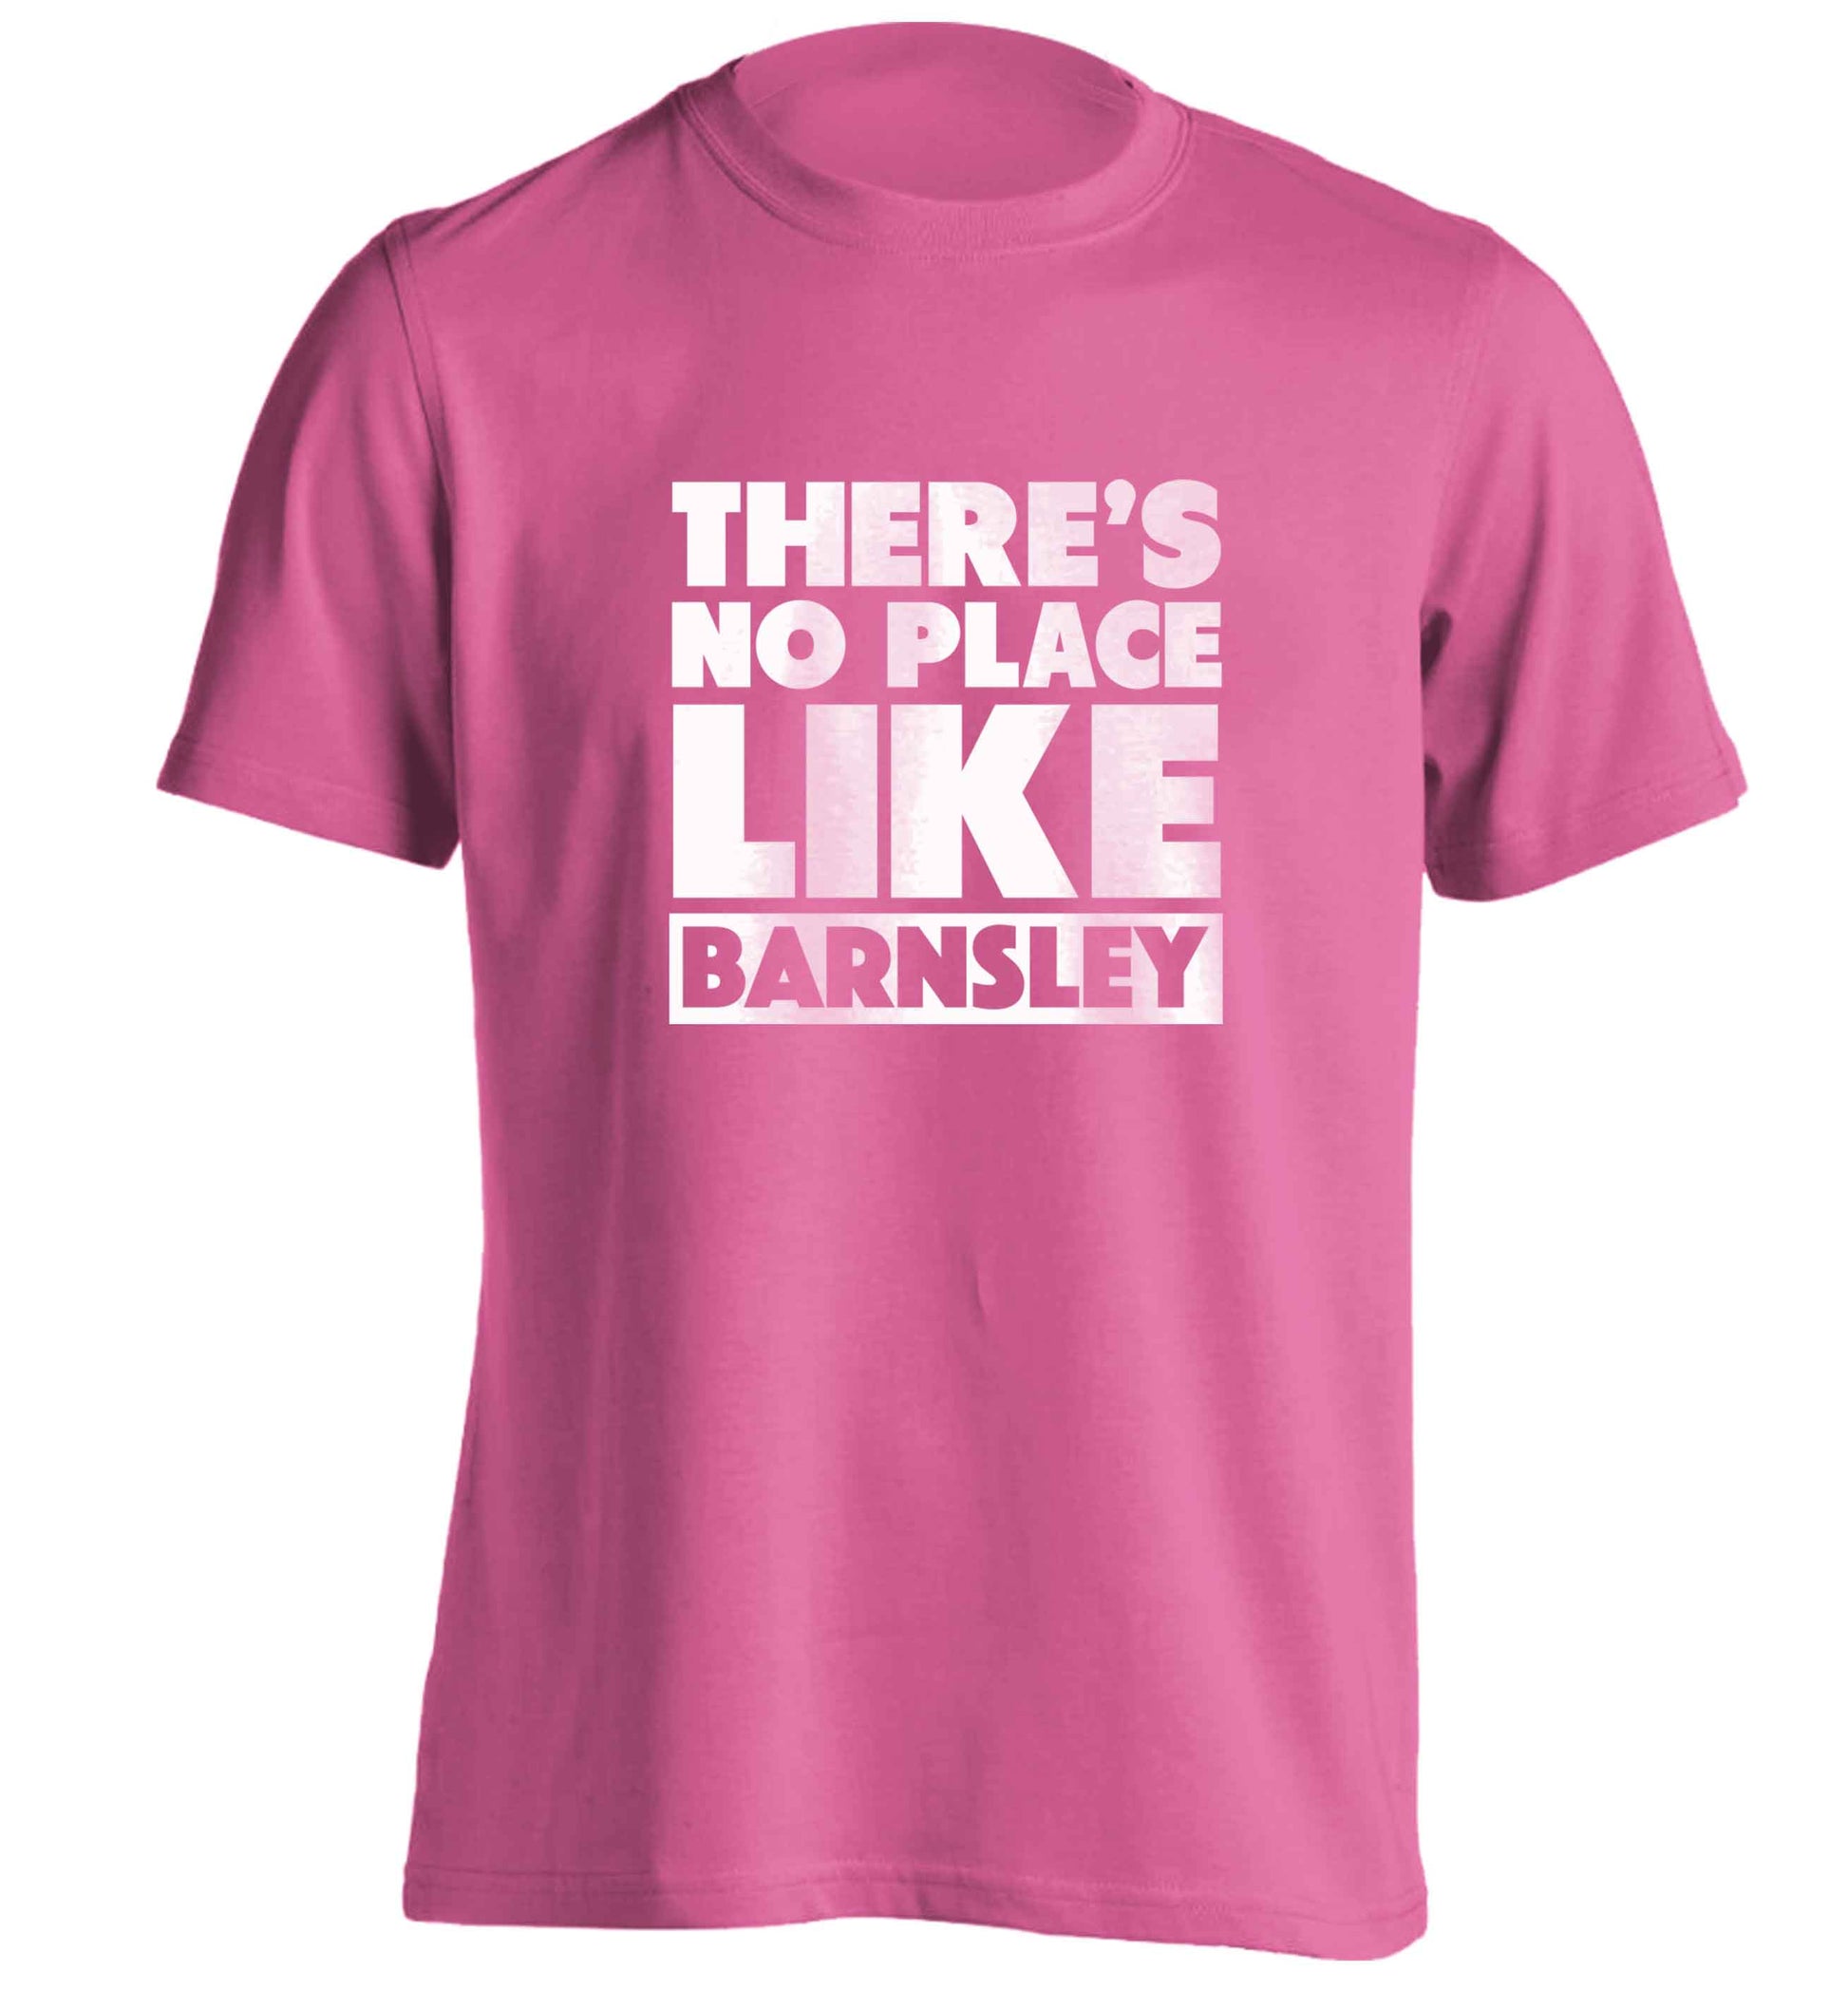 There's No Place Like Barnsley adults unisex pink Tshirt 2XL